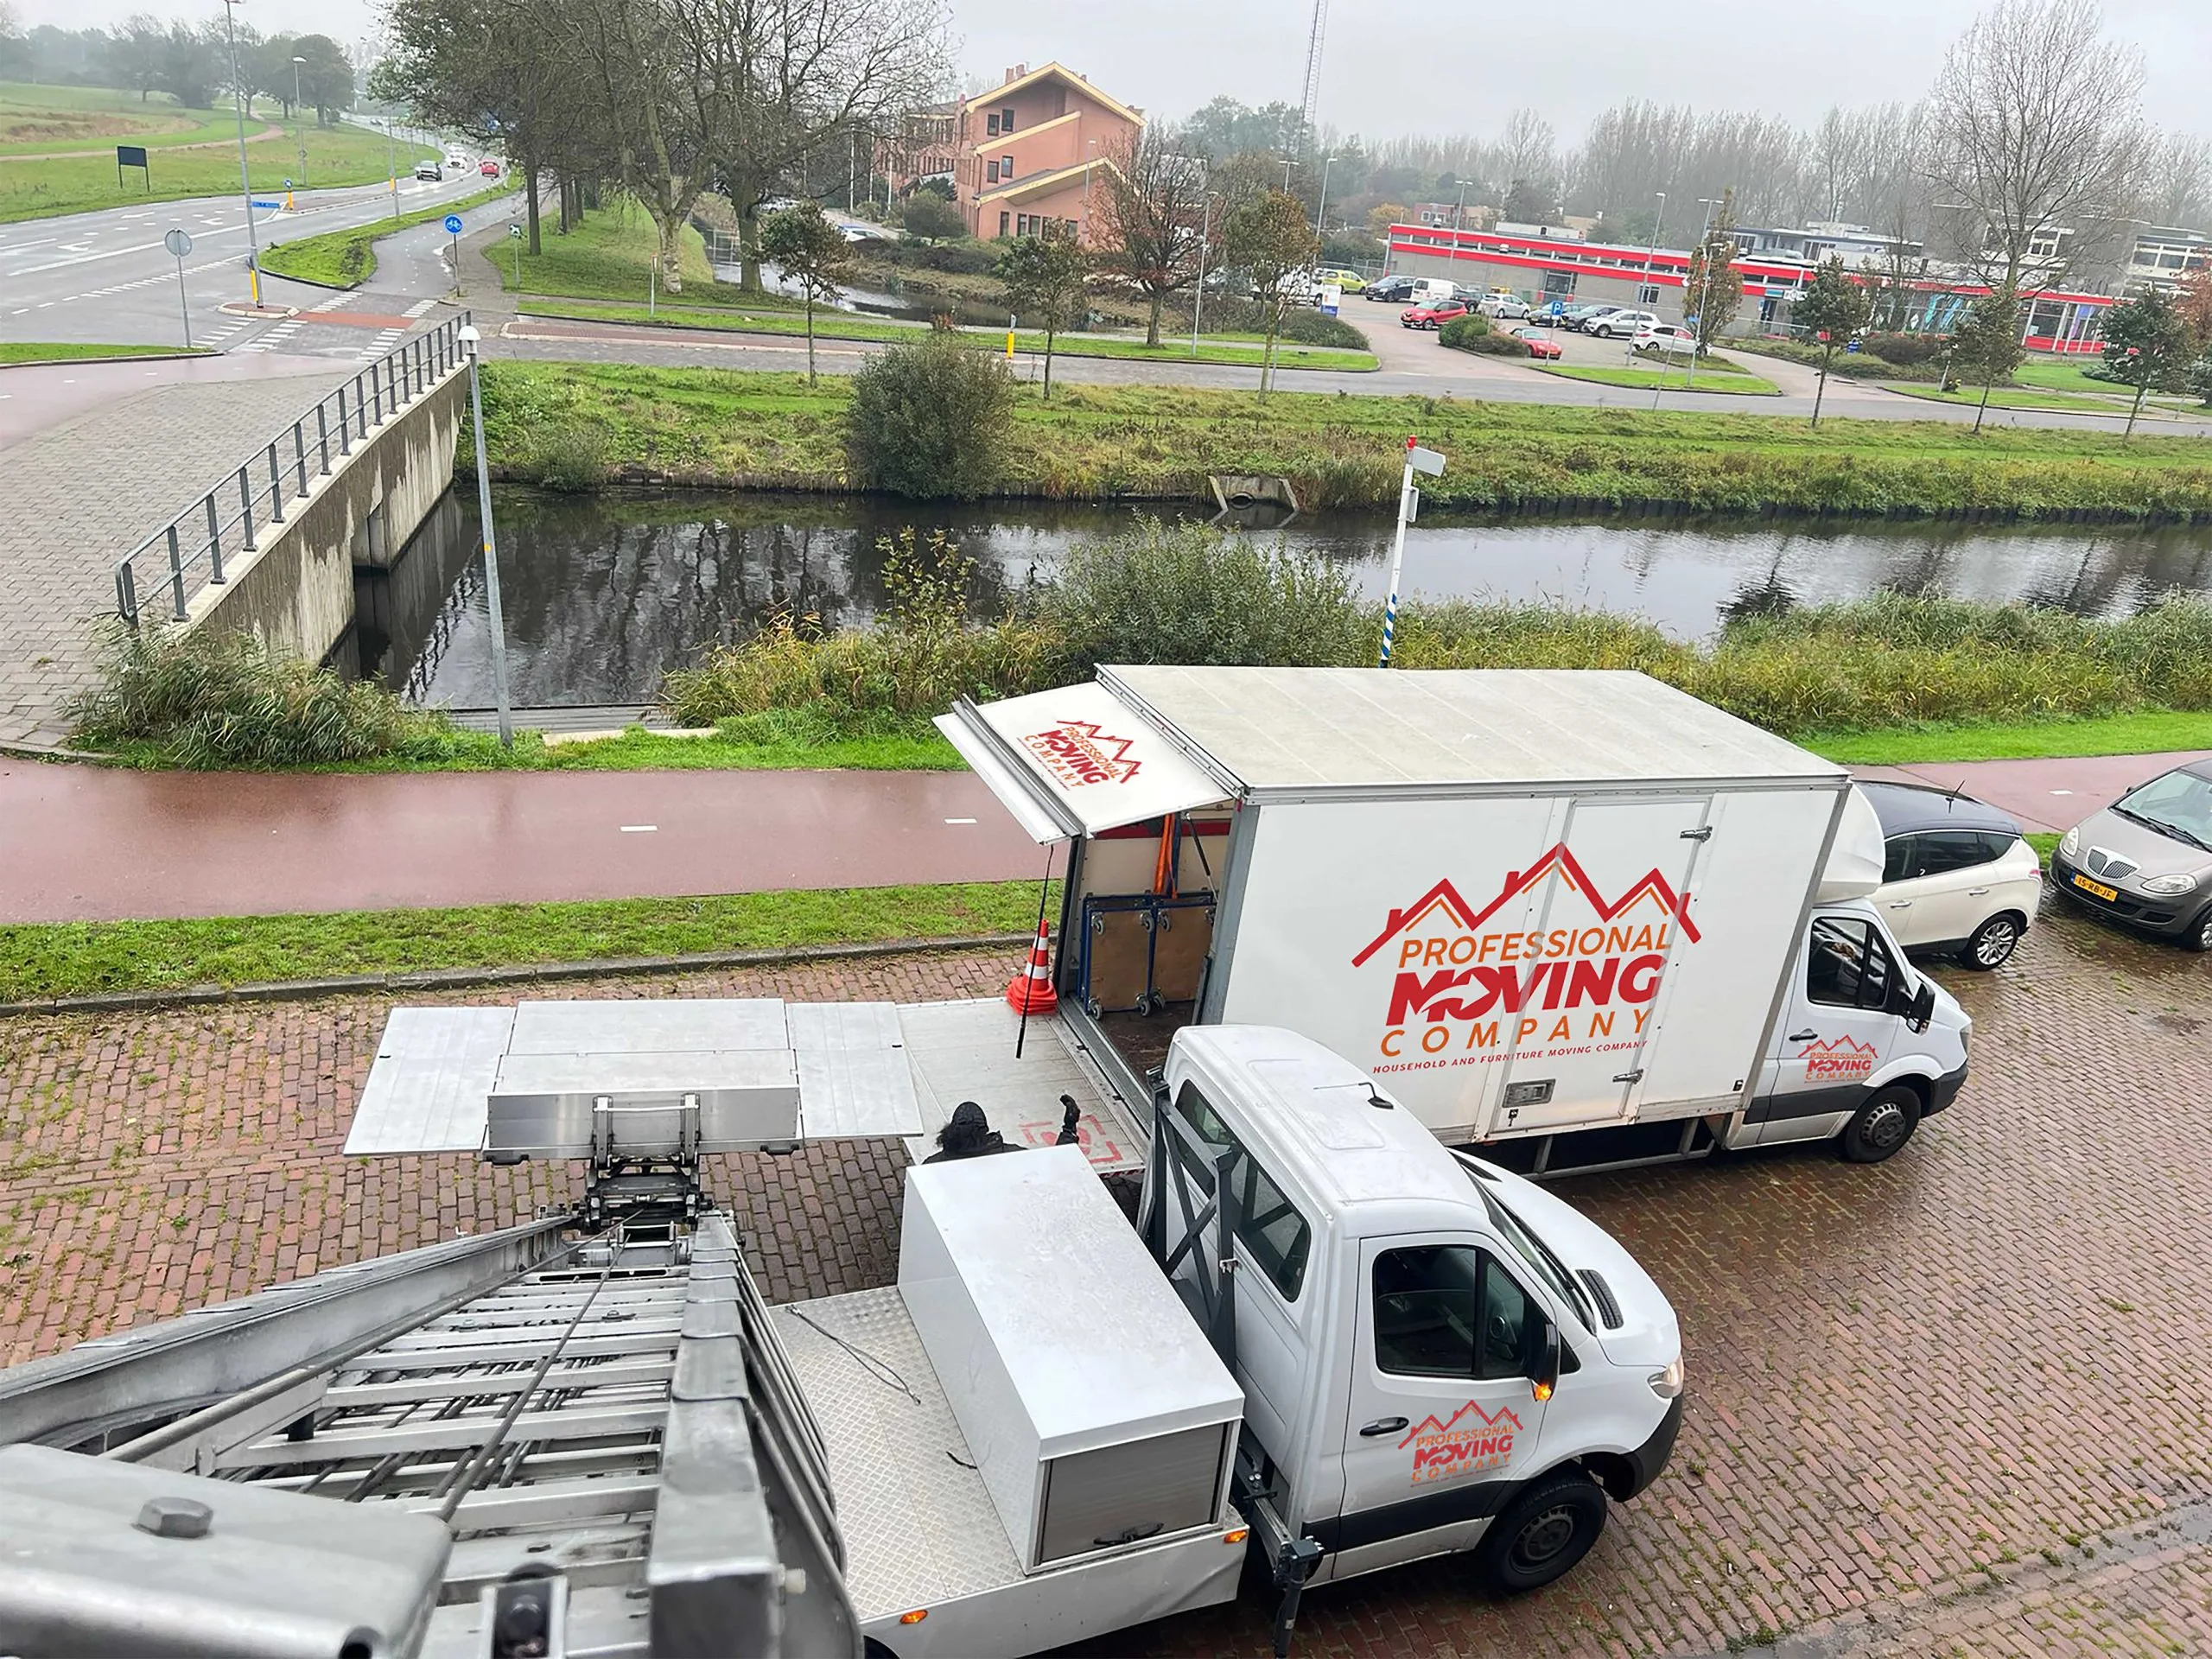 Moving Company Ridderkerk | Comprehensive Moving Services in Ridderkerk Your One-Stop Moving Solution